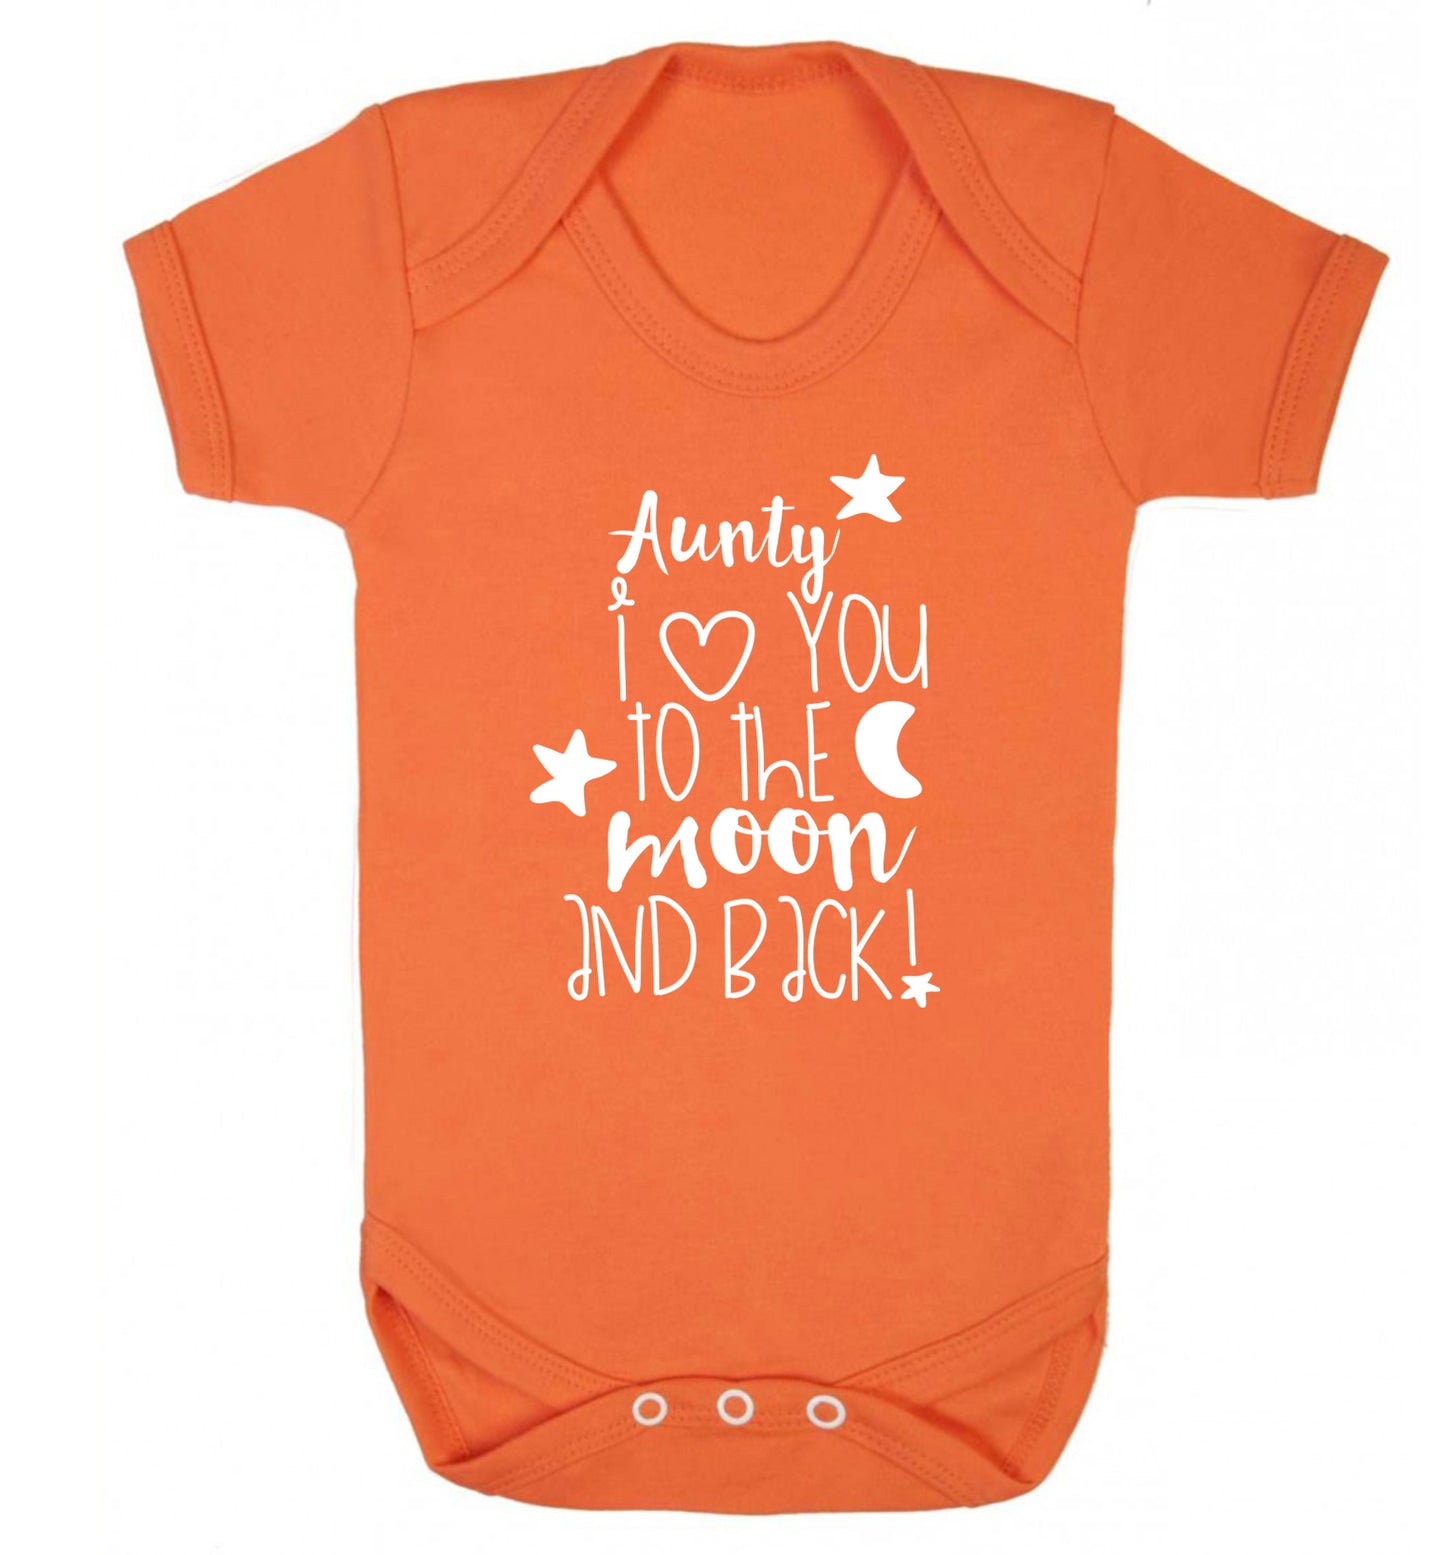 Aunty I love you to the moon and back Baby Vest orange 18-24 months